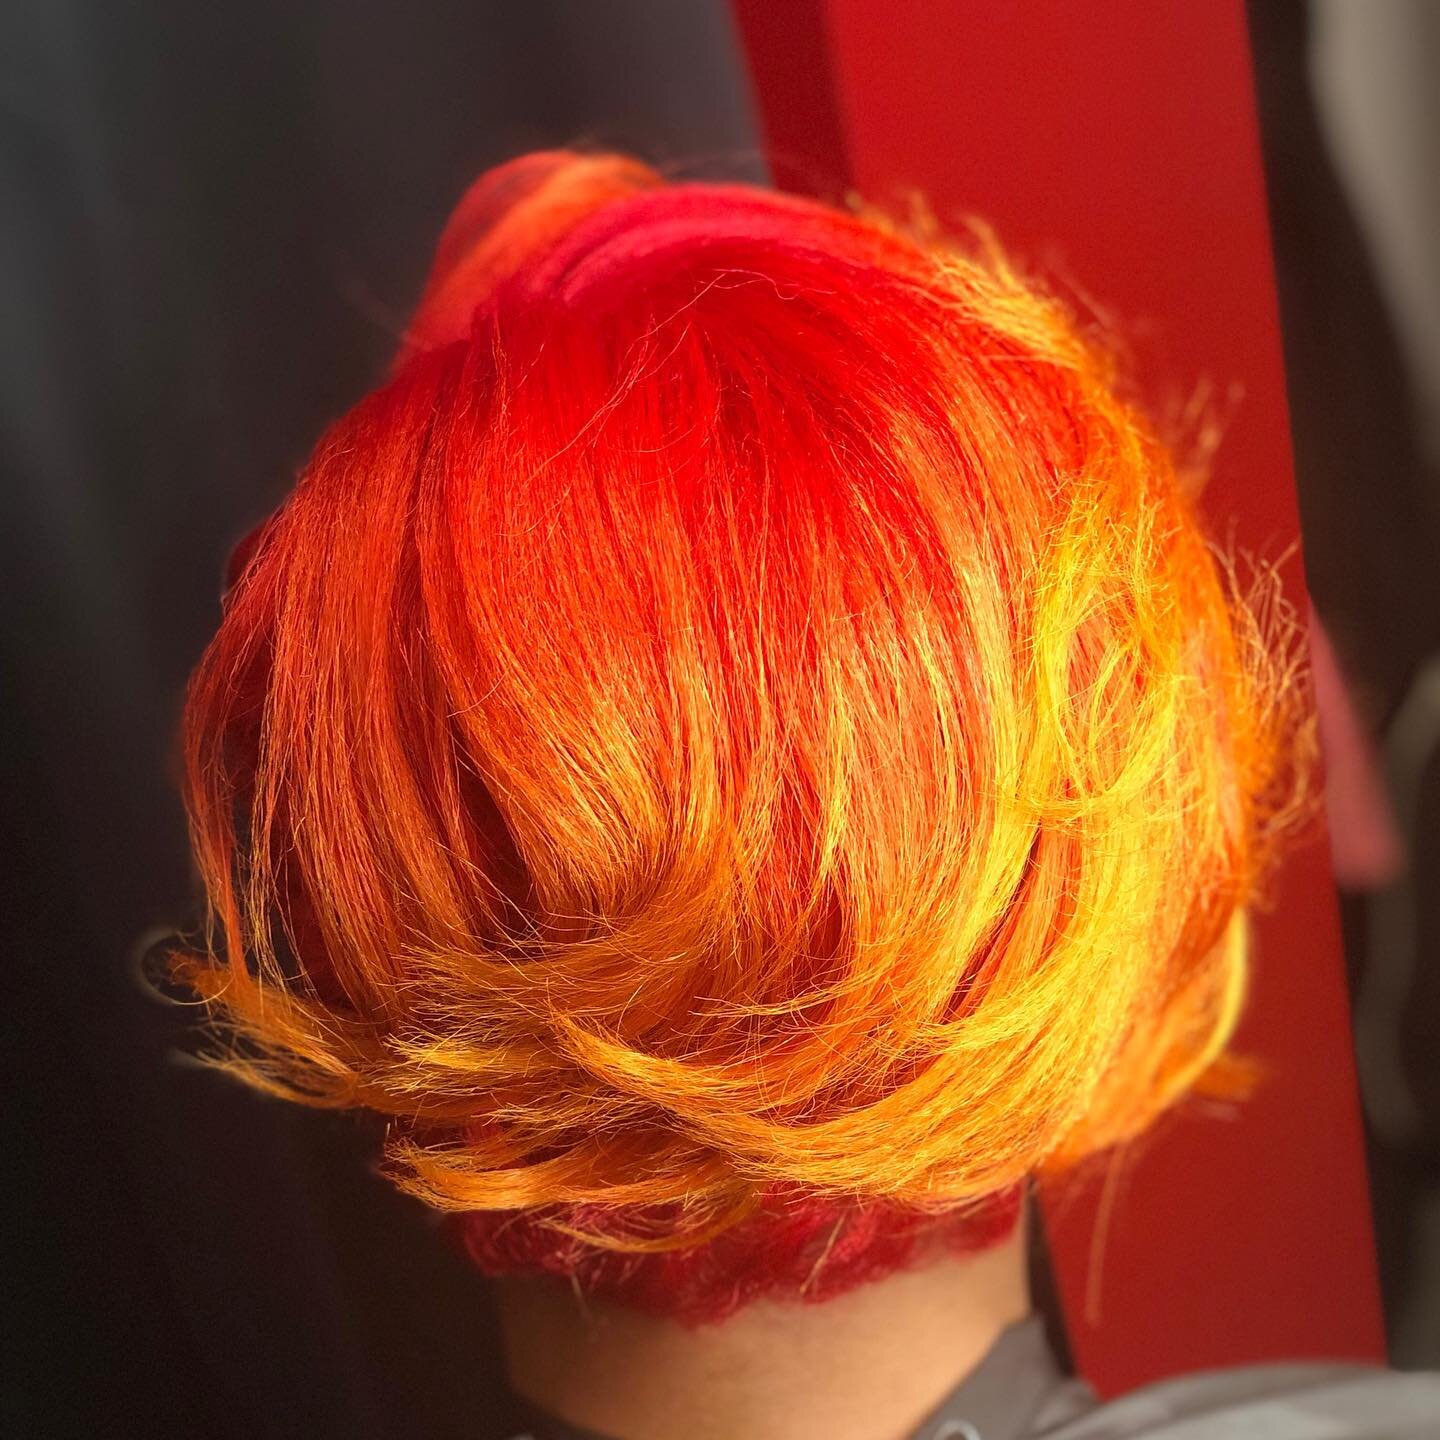 Firestorm was the inspiration for this Visage Beauty. It's something about a beautiful color melt with @influancehaircare that gives me that effervescent feeling. 
#colormelt #colorist #colormebeautiful #firestorm #orangehair #redhair #yellowhair #bl